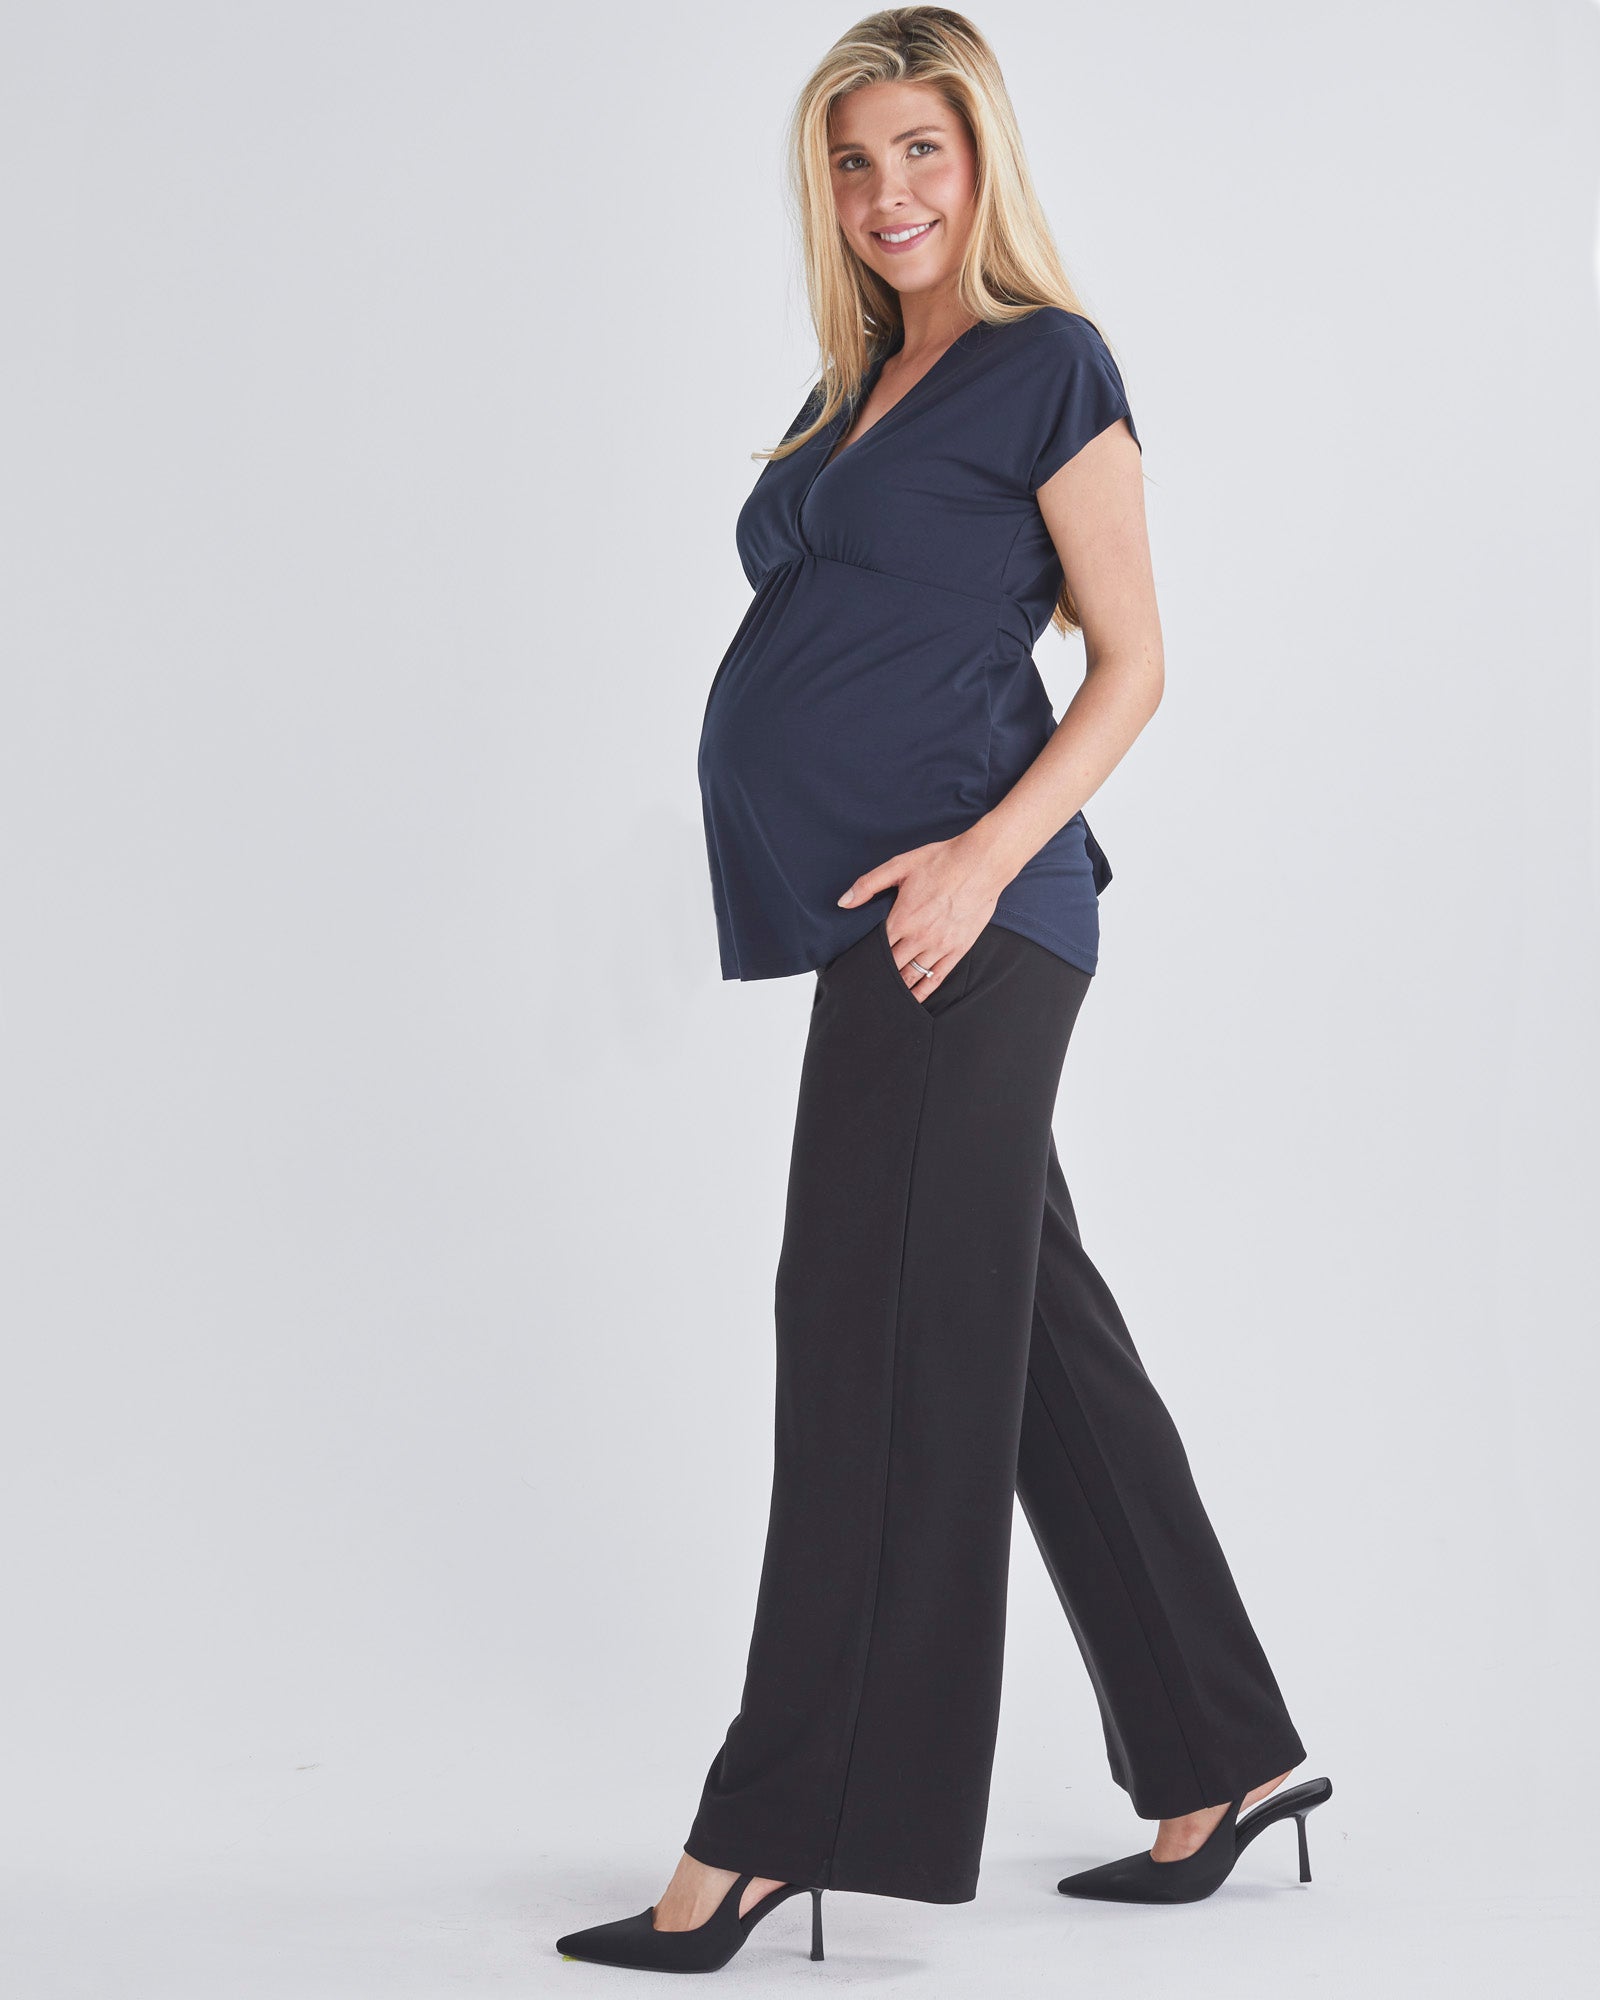 Maternity Work Pants: Power Through in Style and Comfort – ANGEL